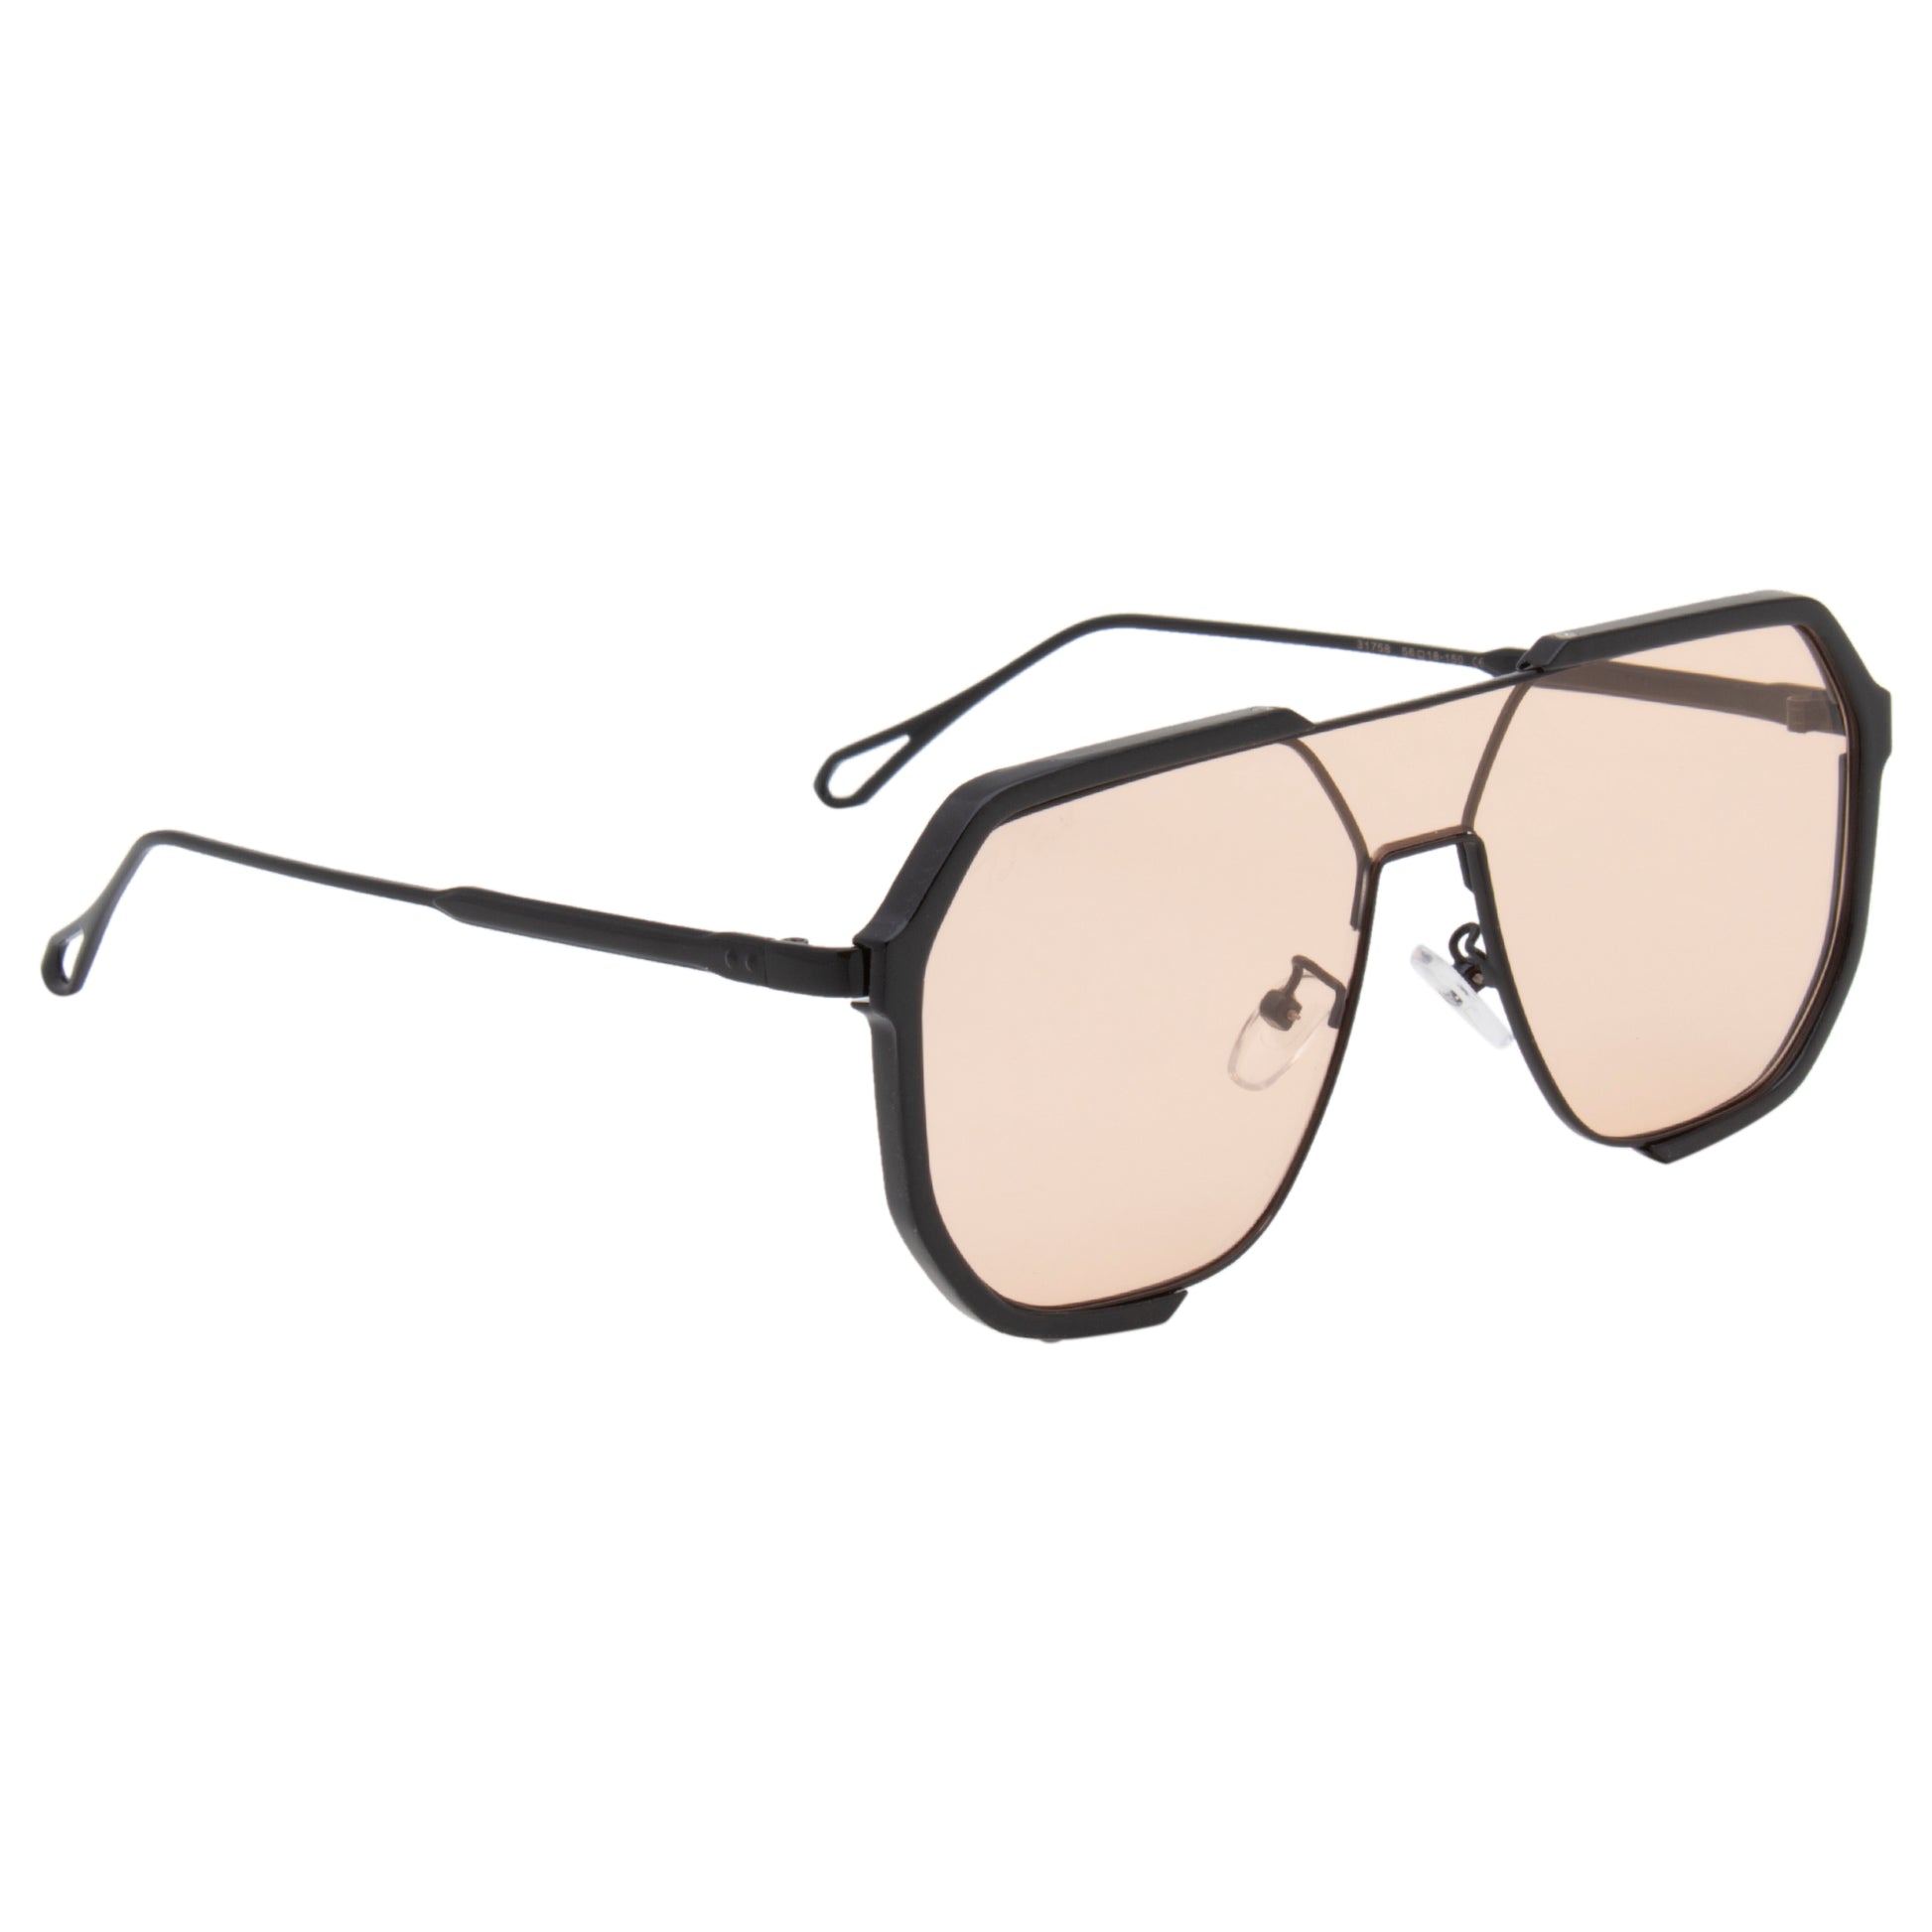 Tempered Glass Ww2 Aviator Sunglasses Popular Style For Men And Women Toad  Glasses Q230919 From Lianwu09, $9.44